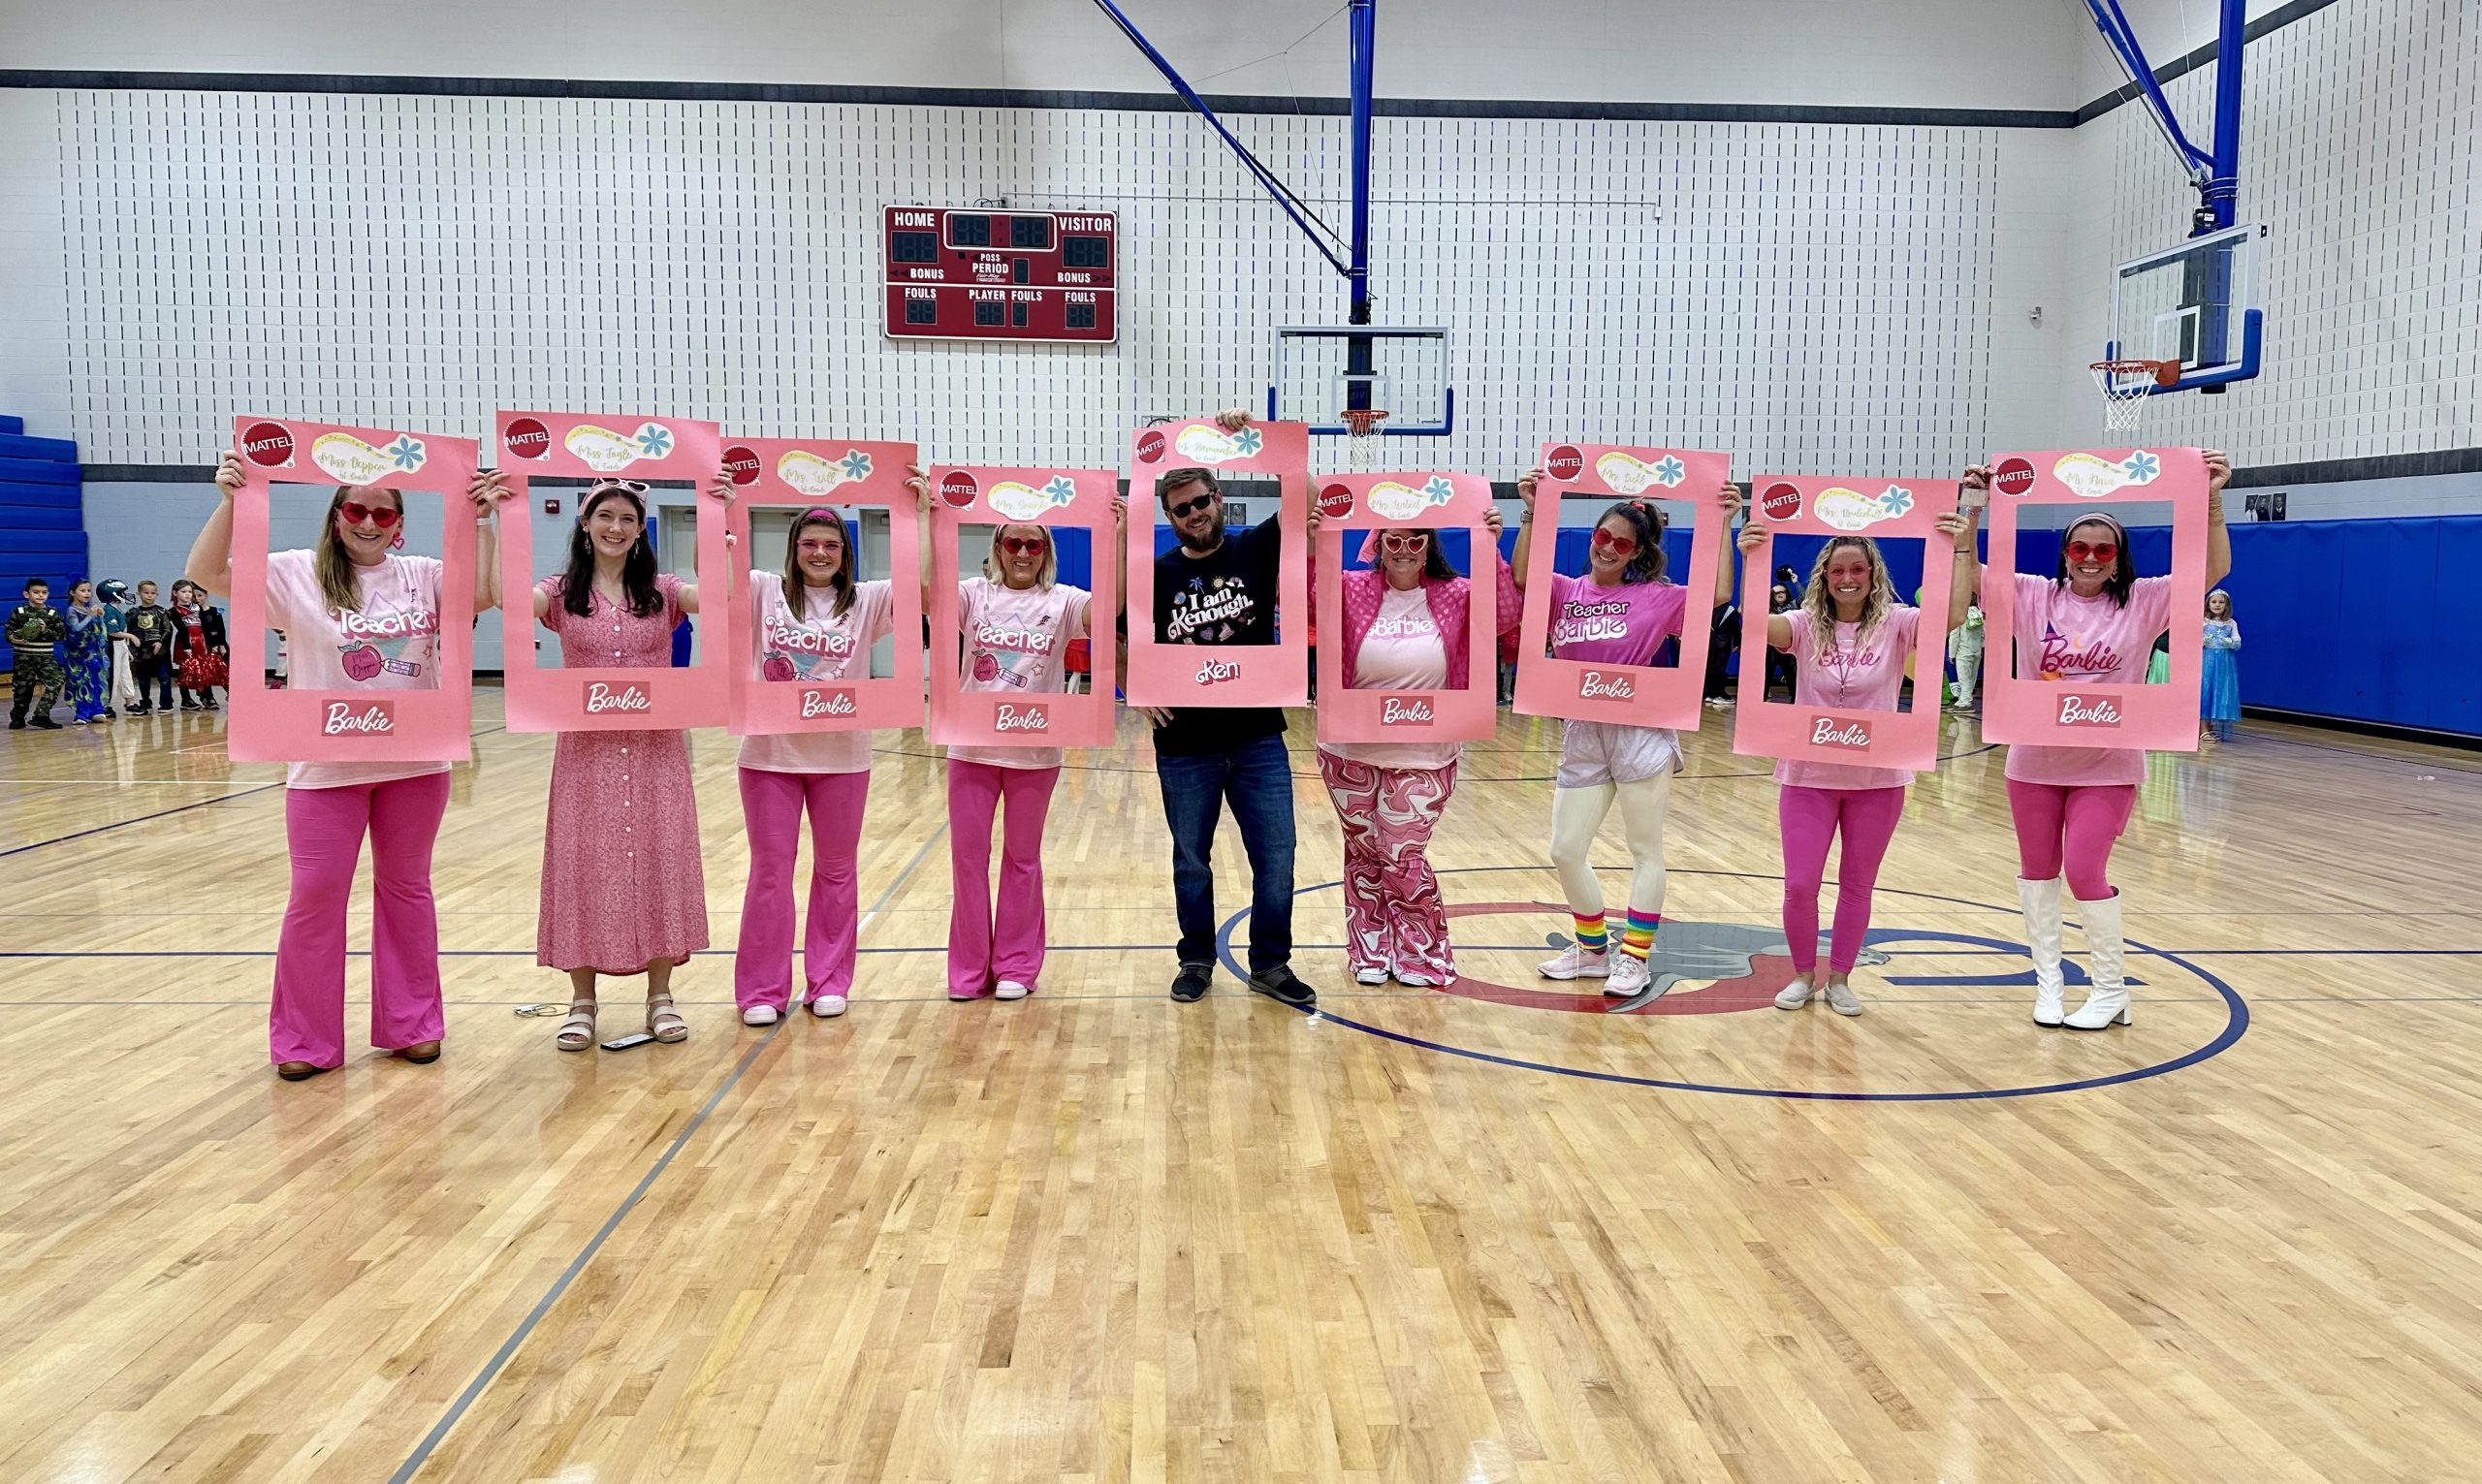 1st grade teachers dressed up as Barbie and Ken for Halloween Parade